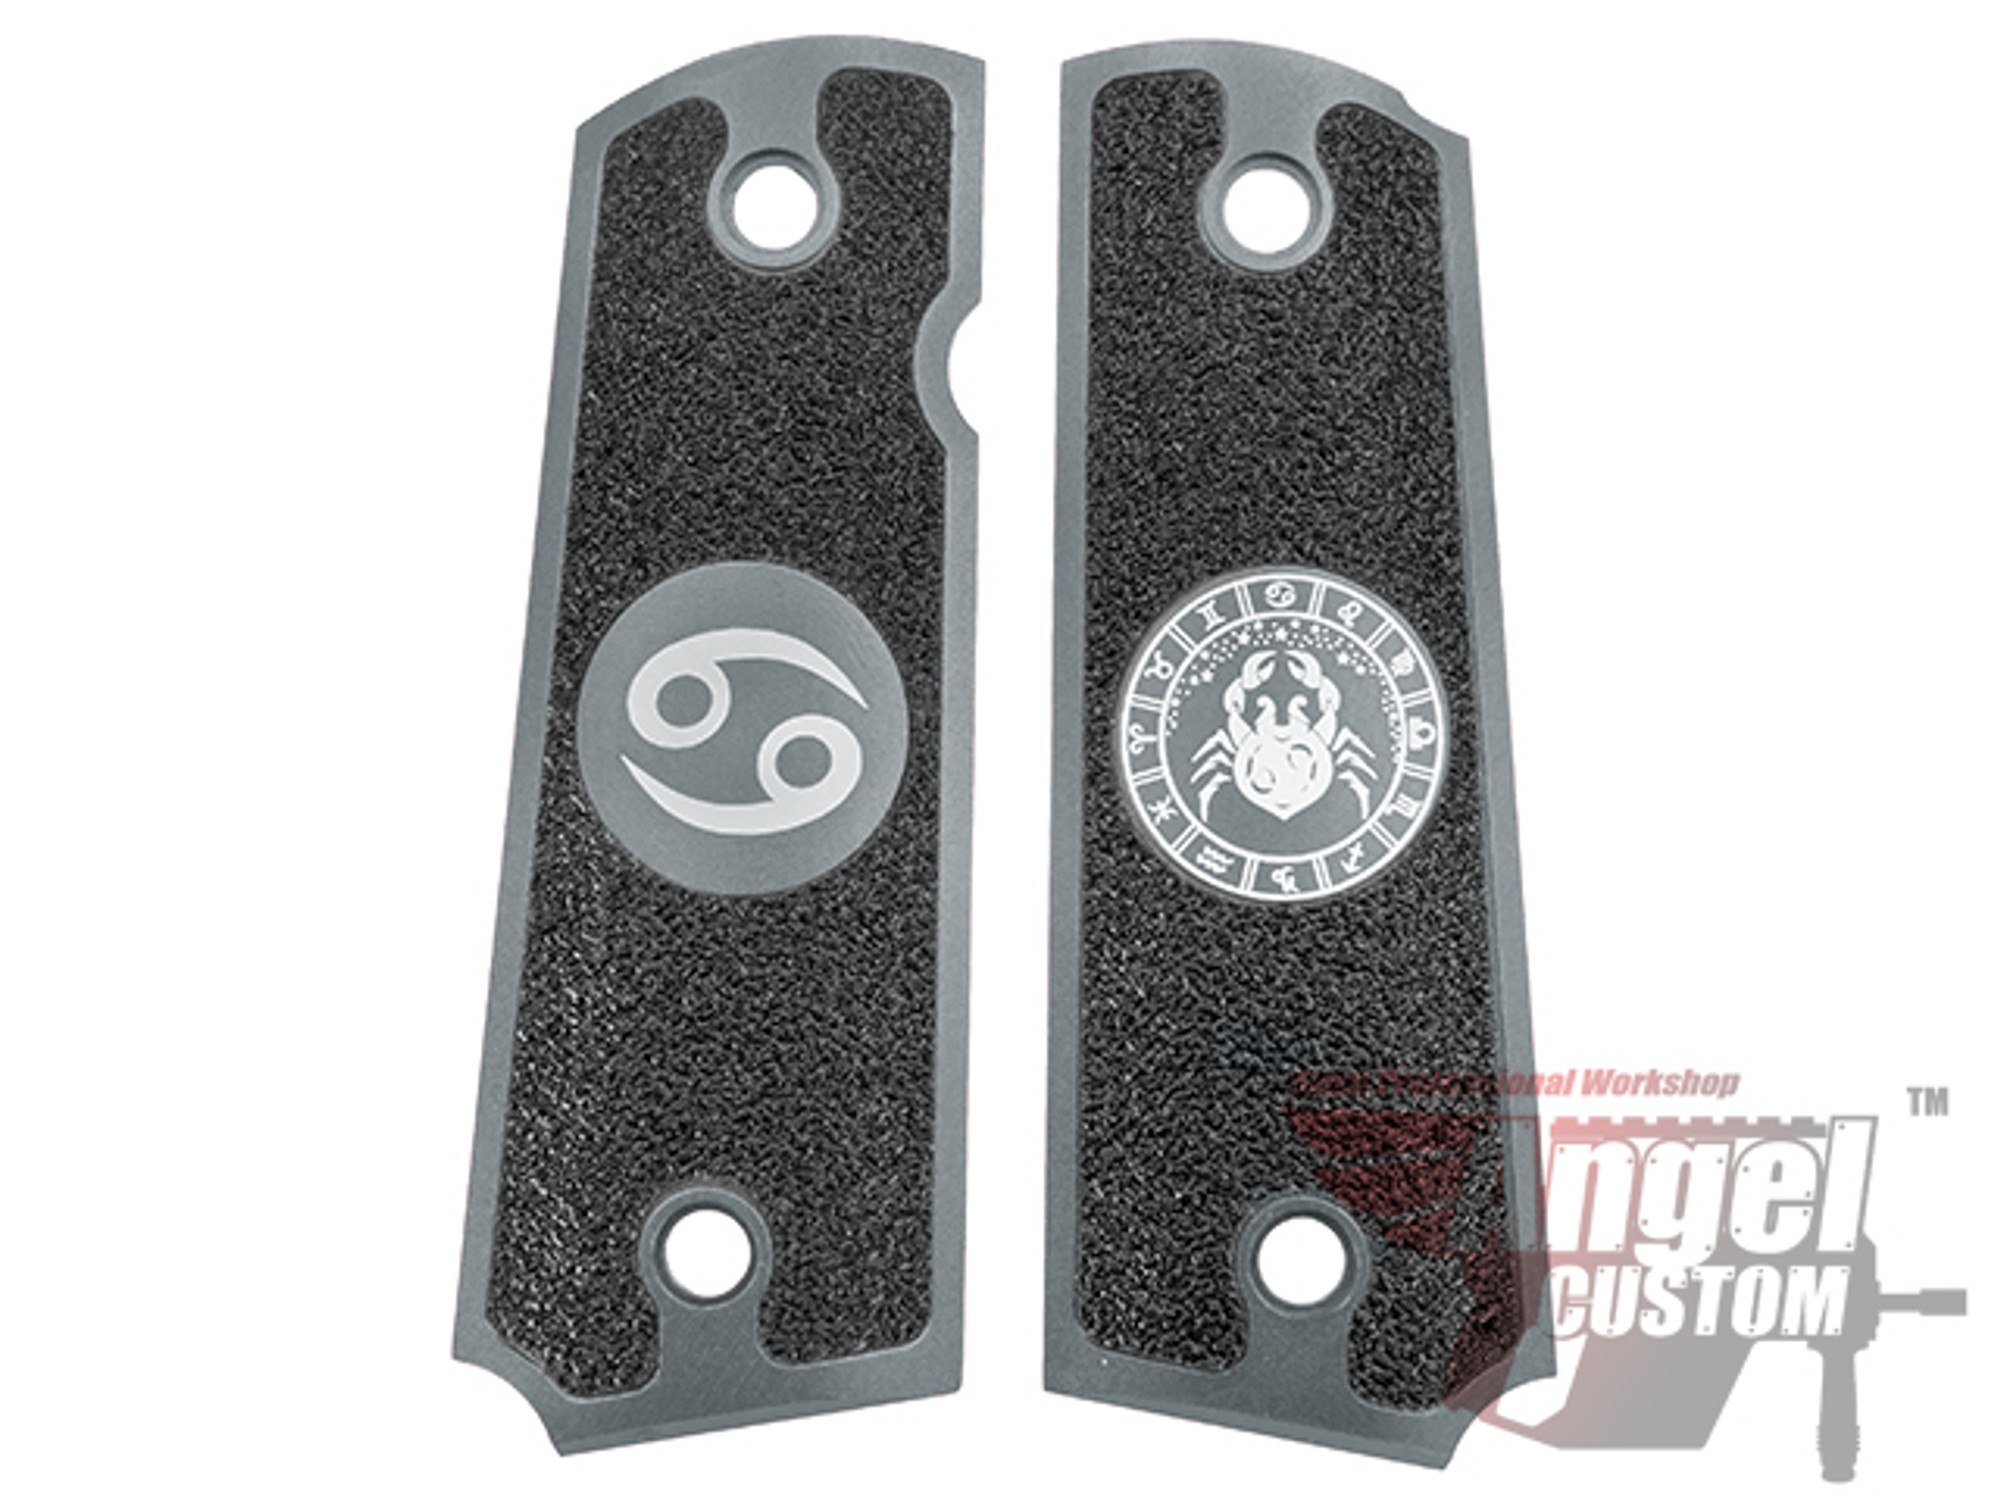 Angel Custom CNC Machined Tac-Glove "Zodiac" Grips for WE-Tech 1911 Series Airsoft Pistols - Dark Grey (Sign: Cancer)